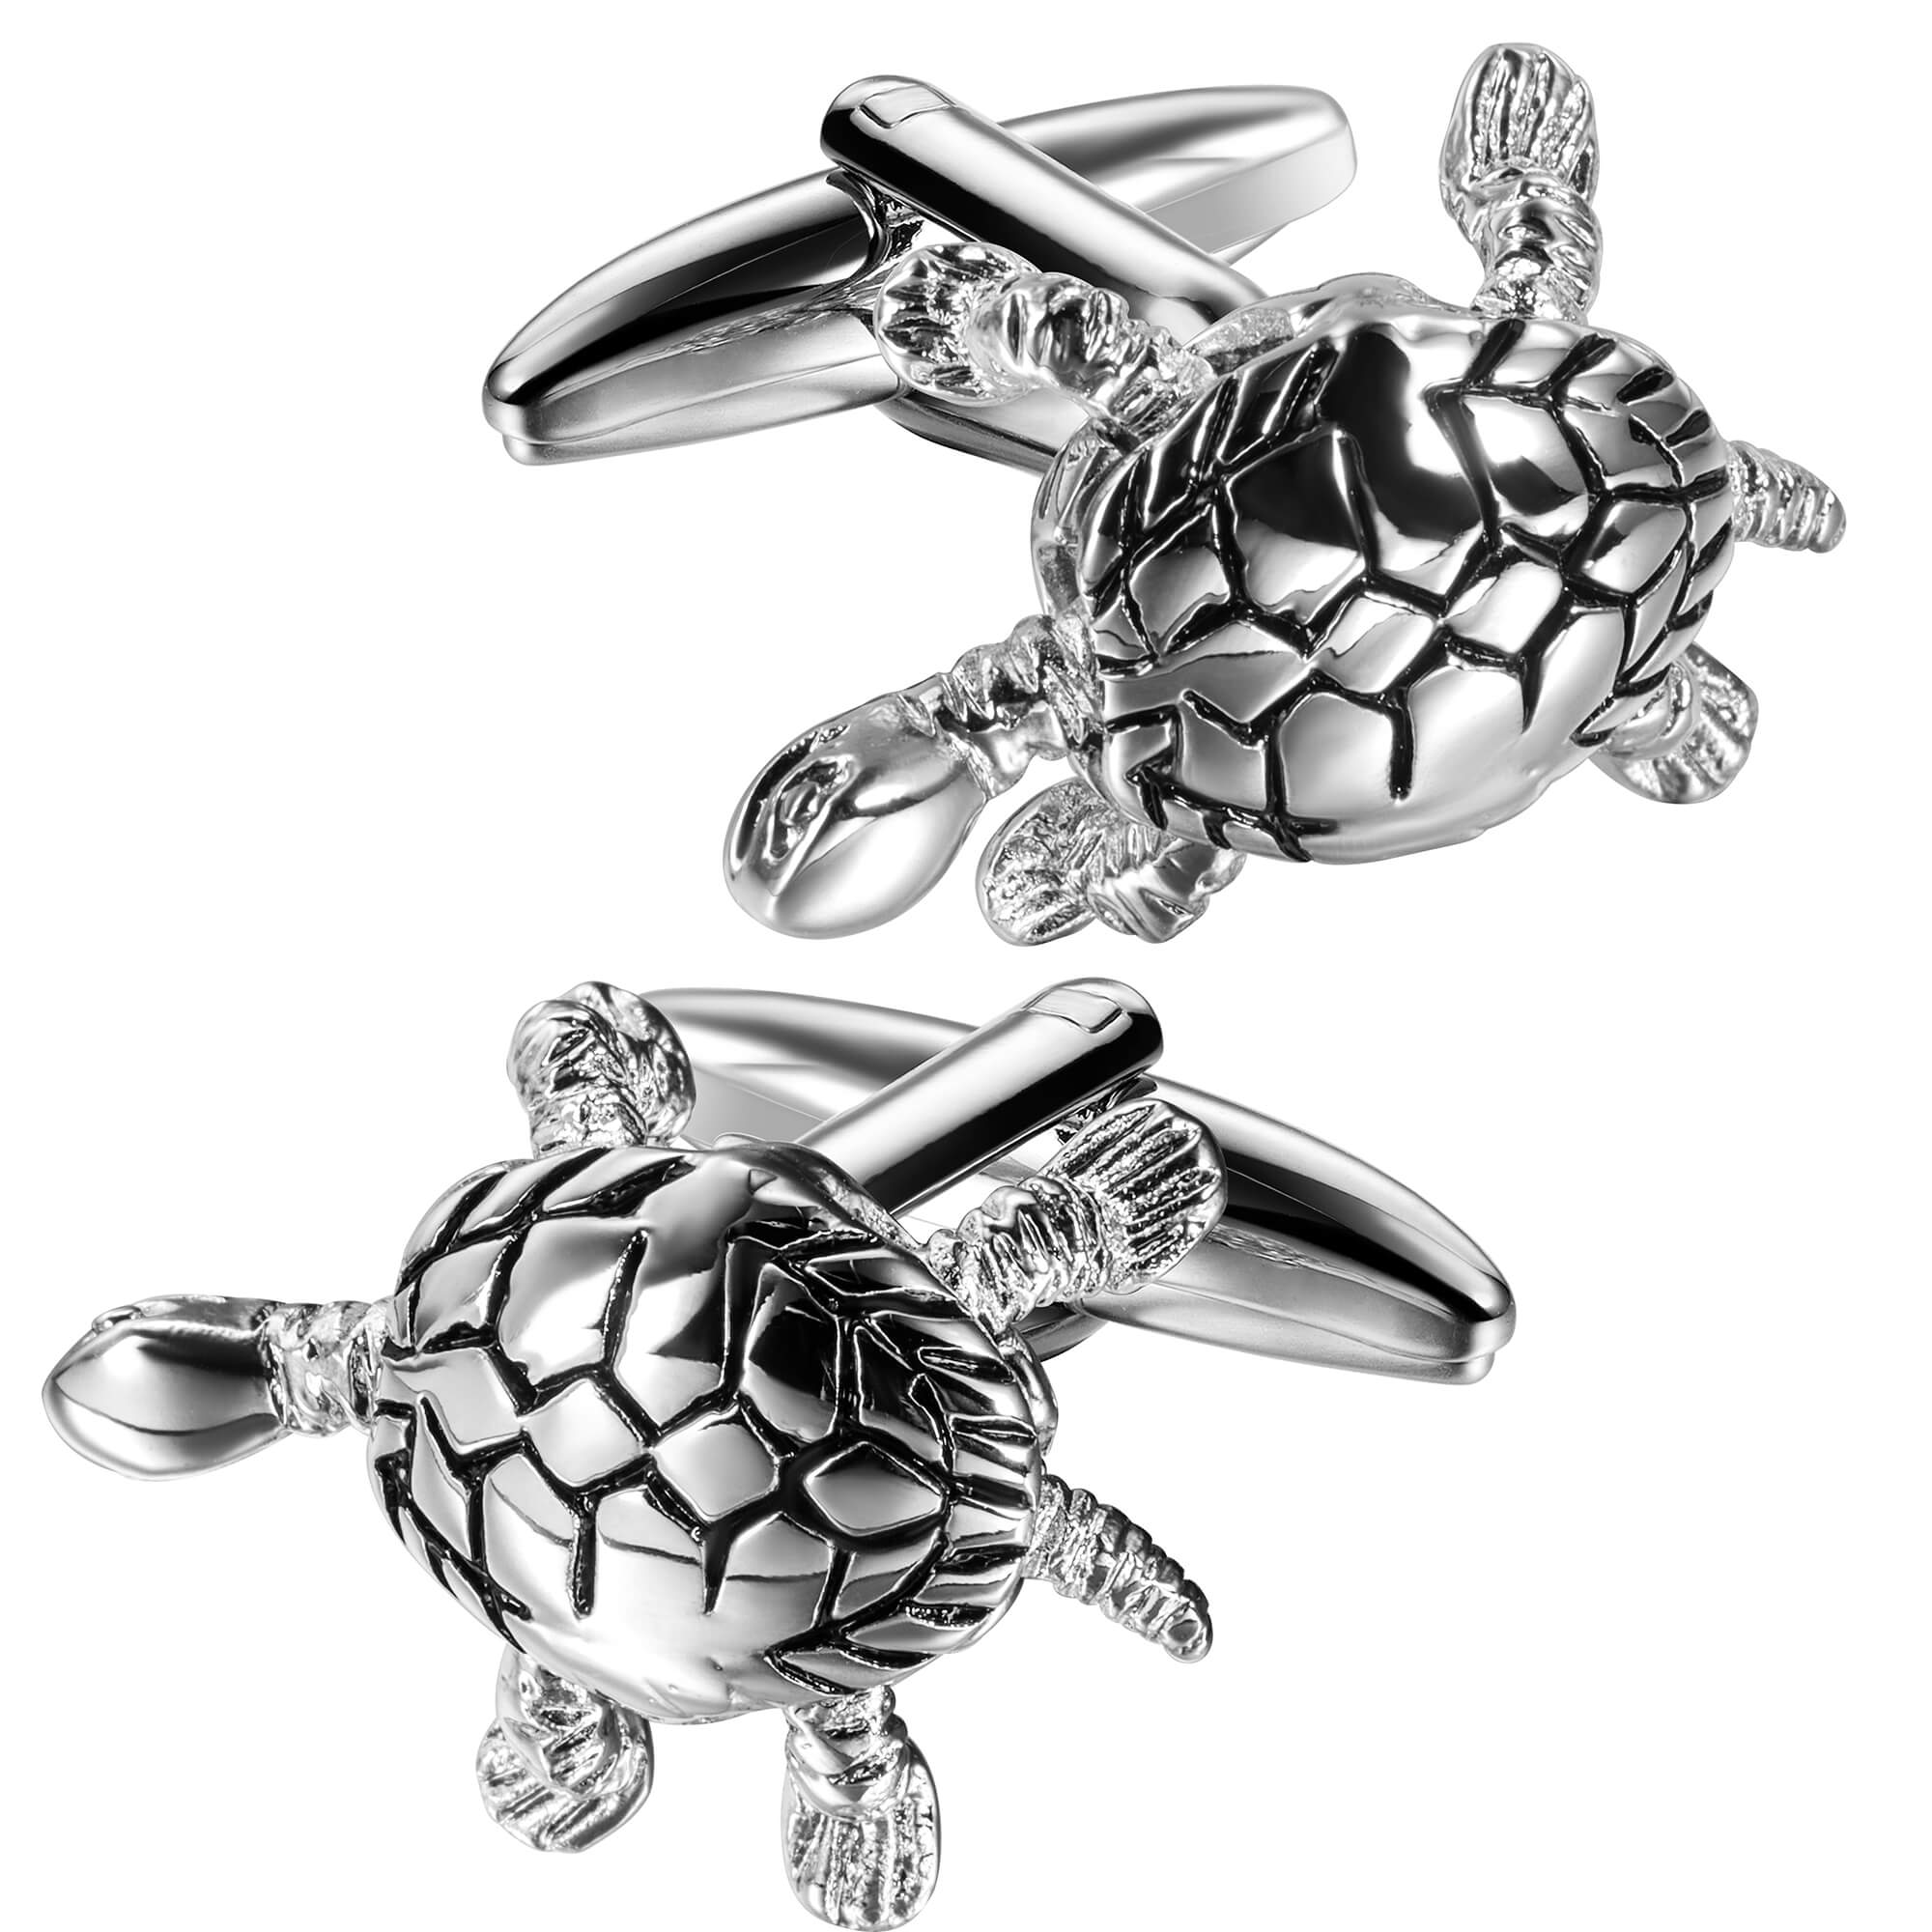 Silver Turtle Cufflinks with Moving Head & Legs